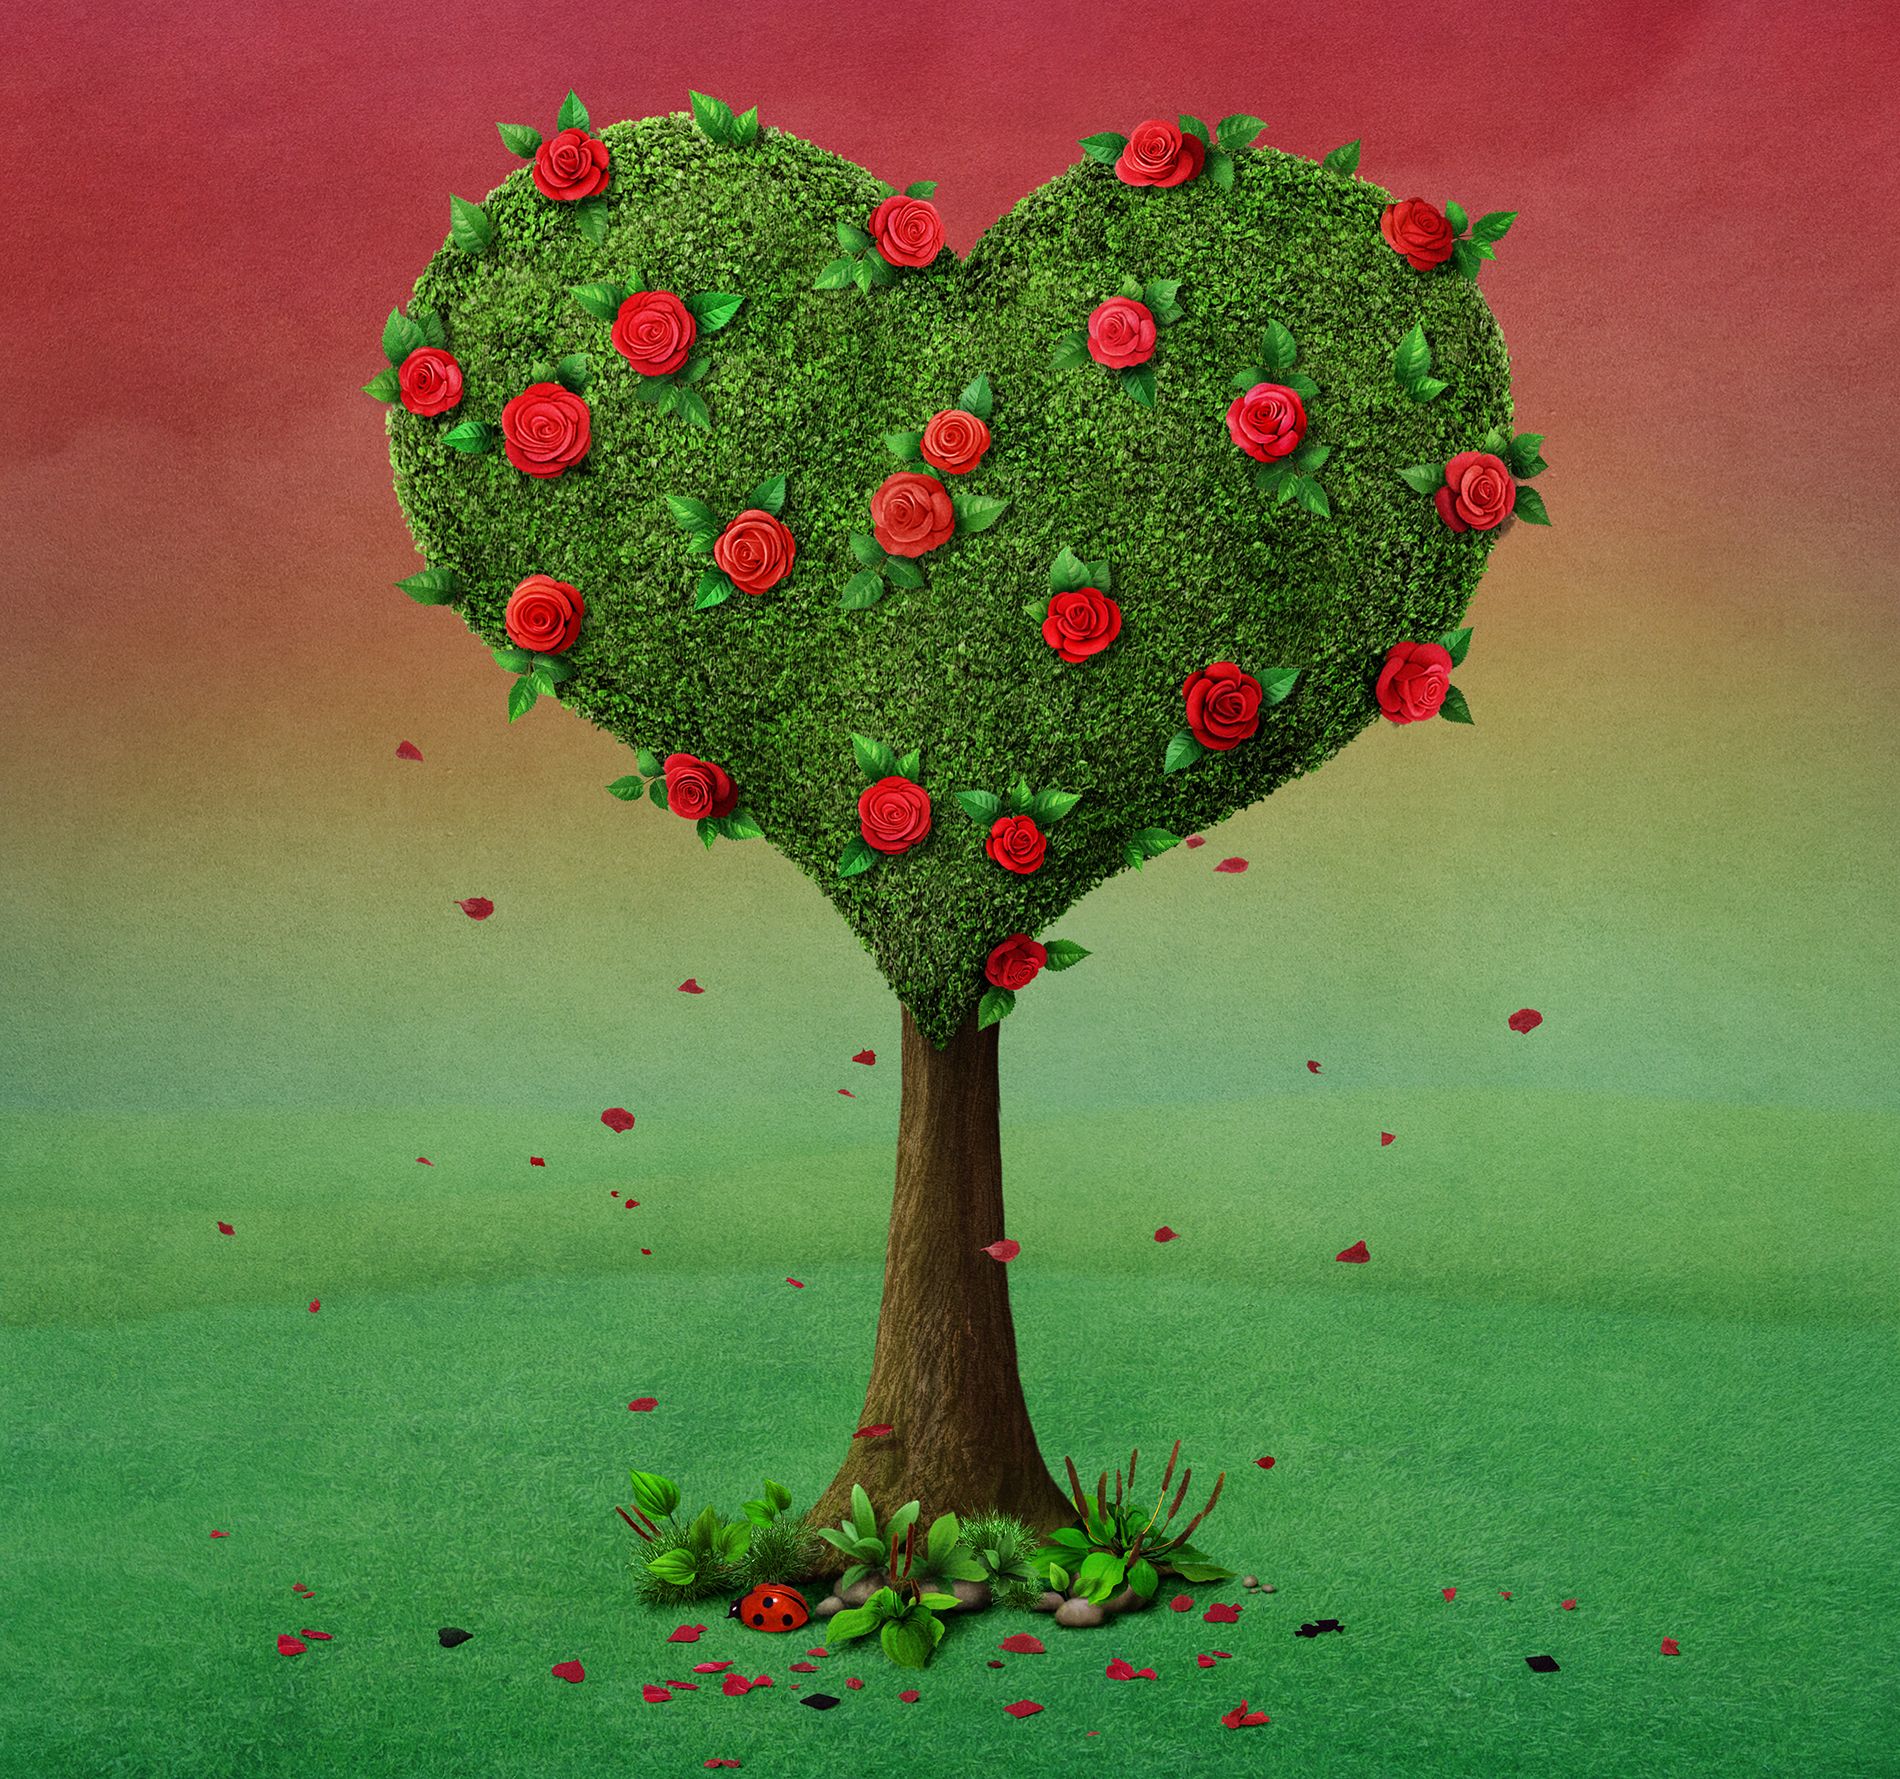 Heart shaped tree with falling petals .freegreatpicture.com